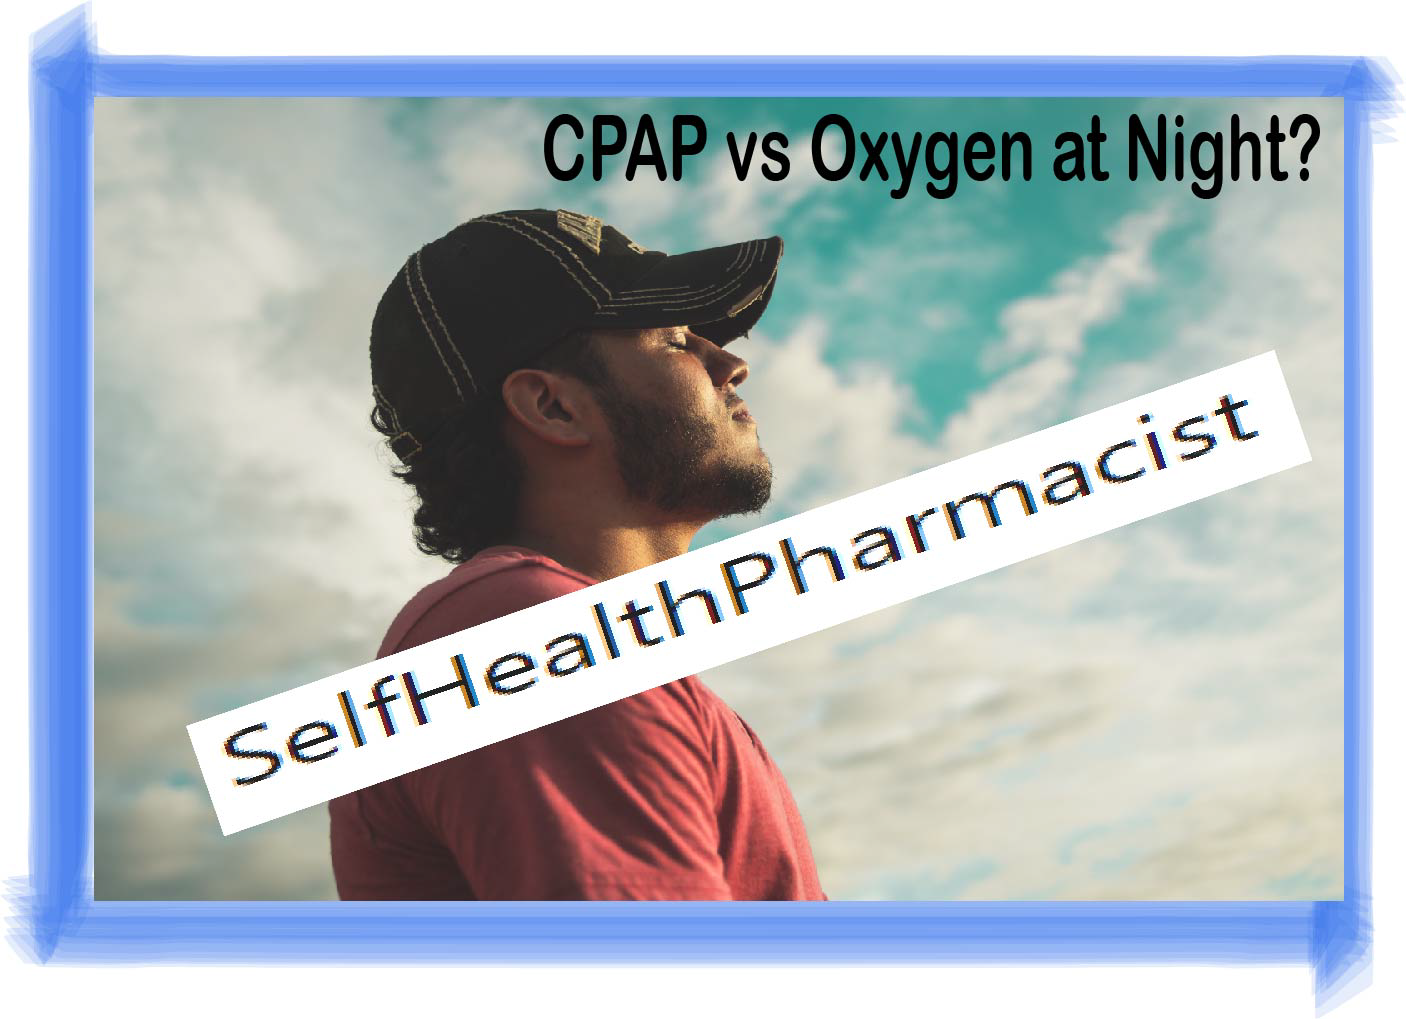 CPAP vs Oxygen at Night